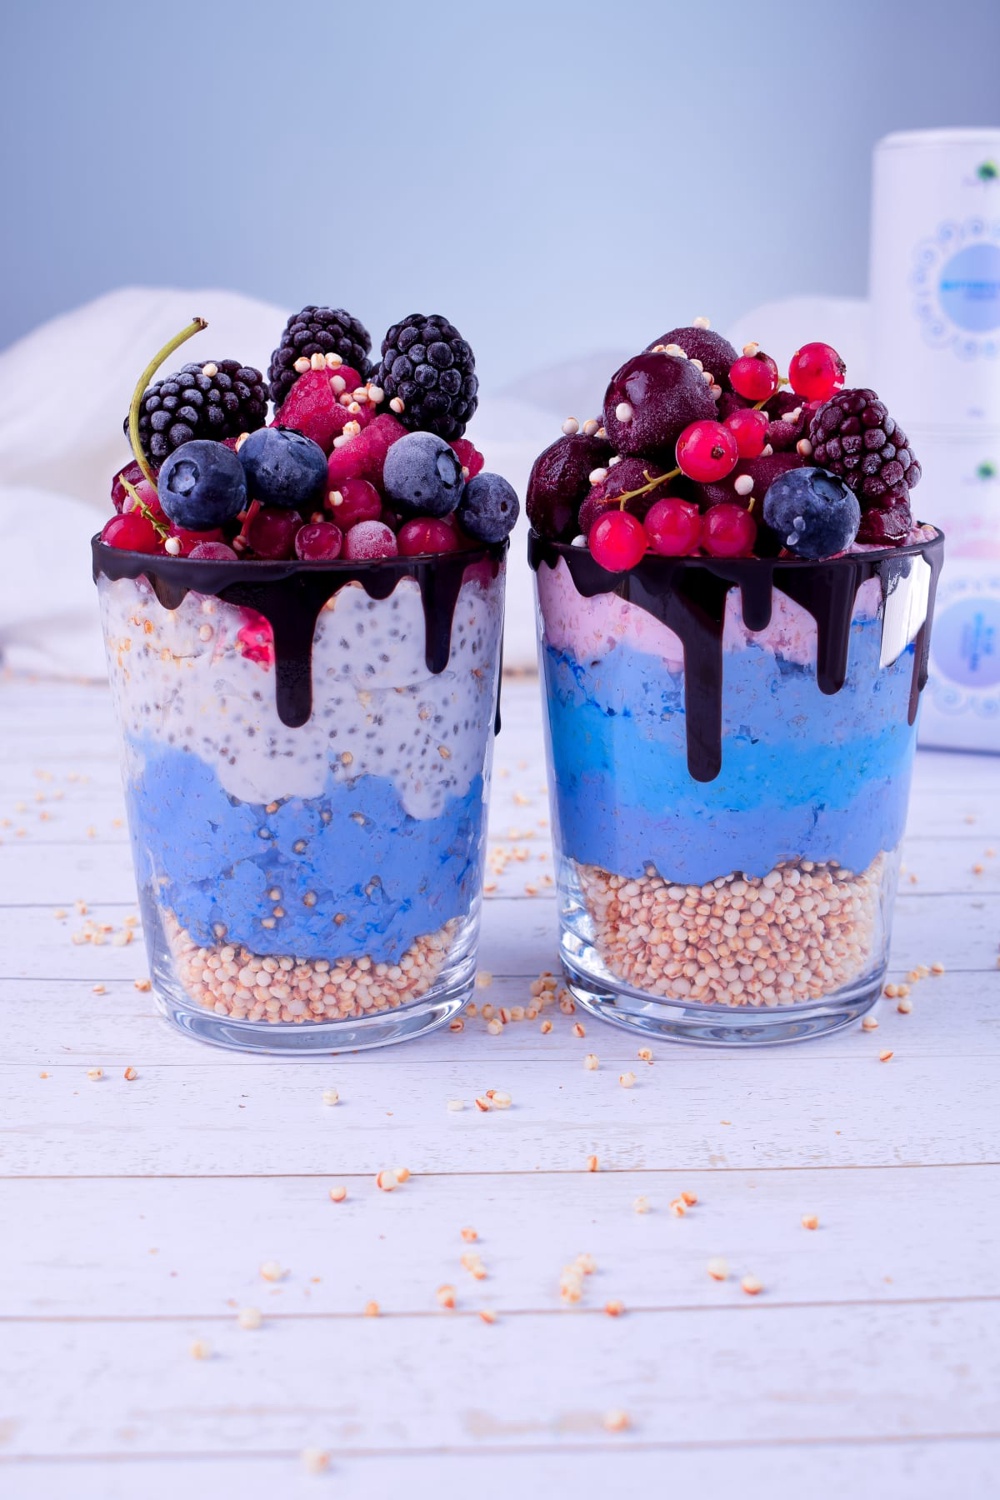 Breakfast with Coconut Chia Pudding and Overnight Oats